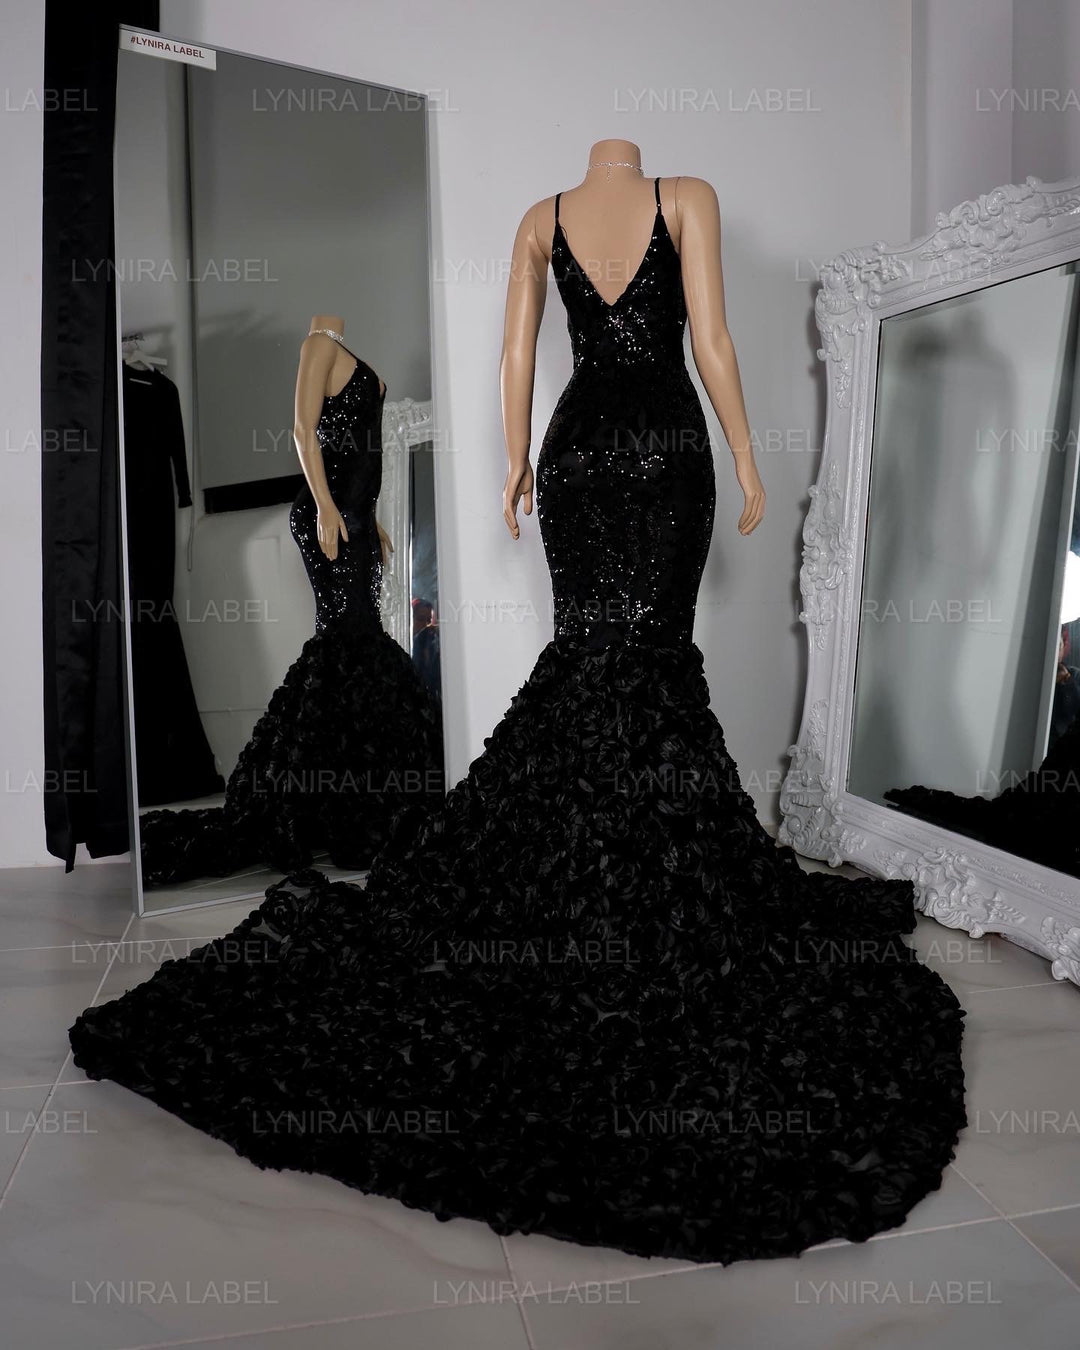 The Vionce Sequin Gown